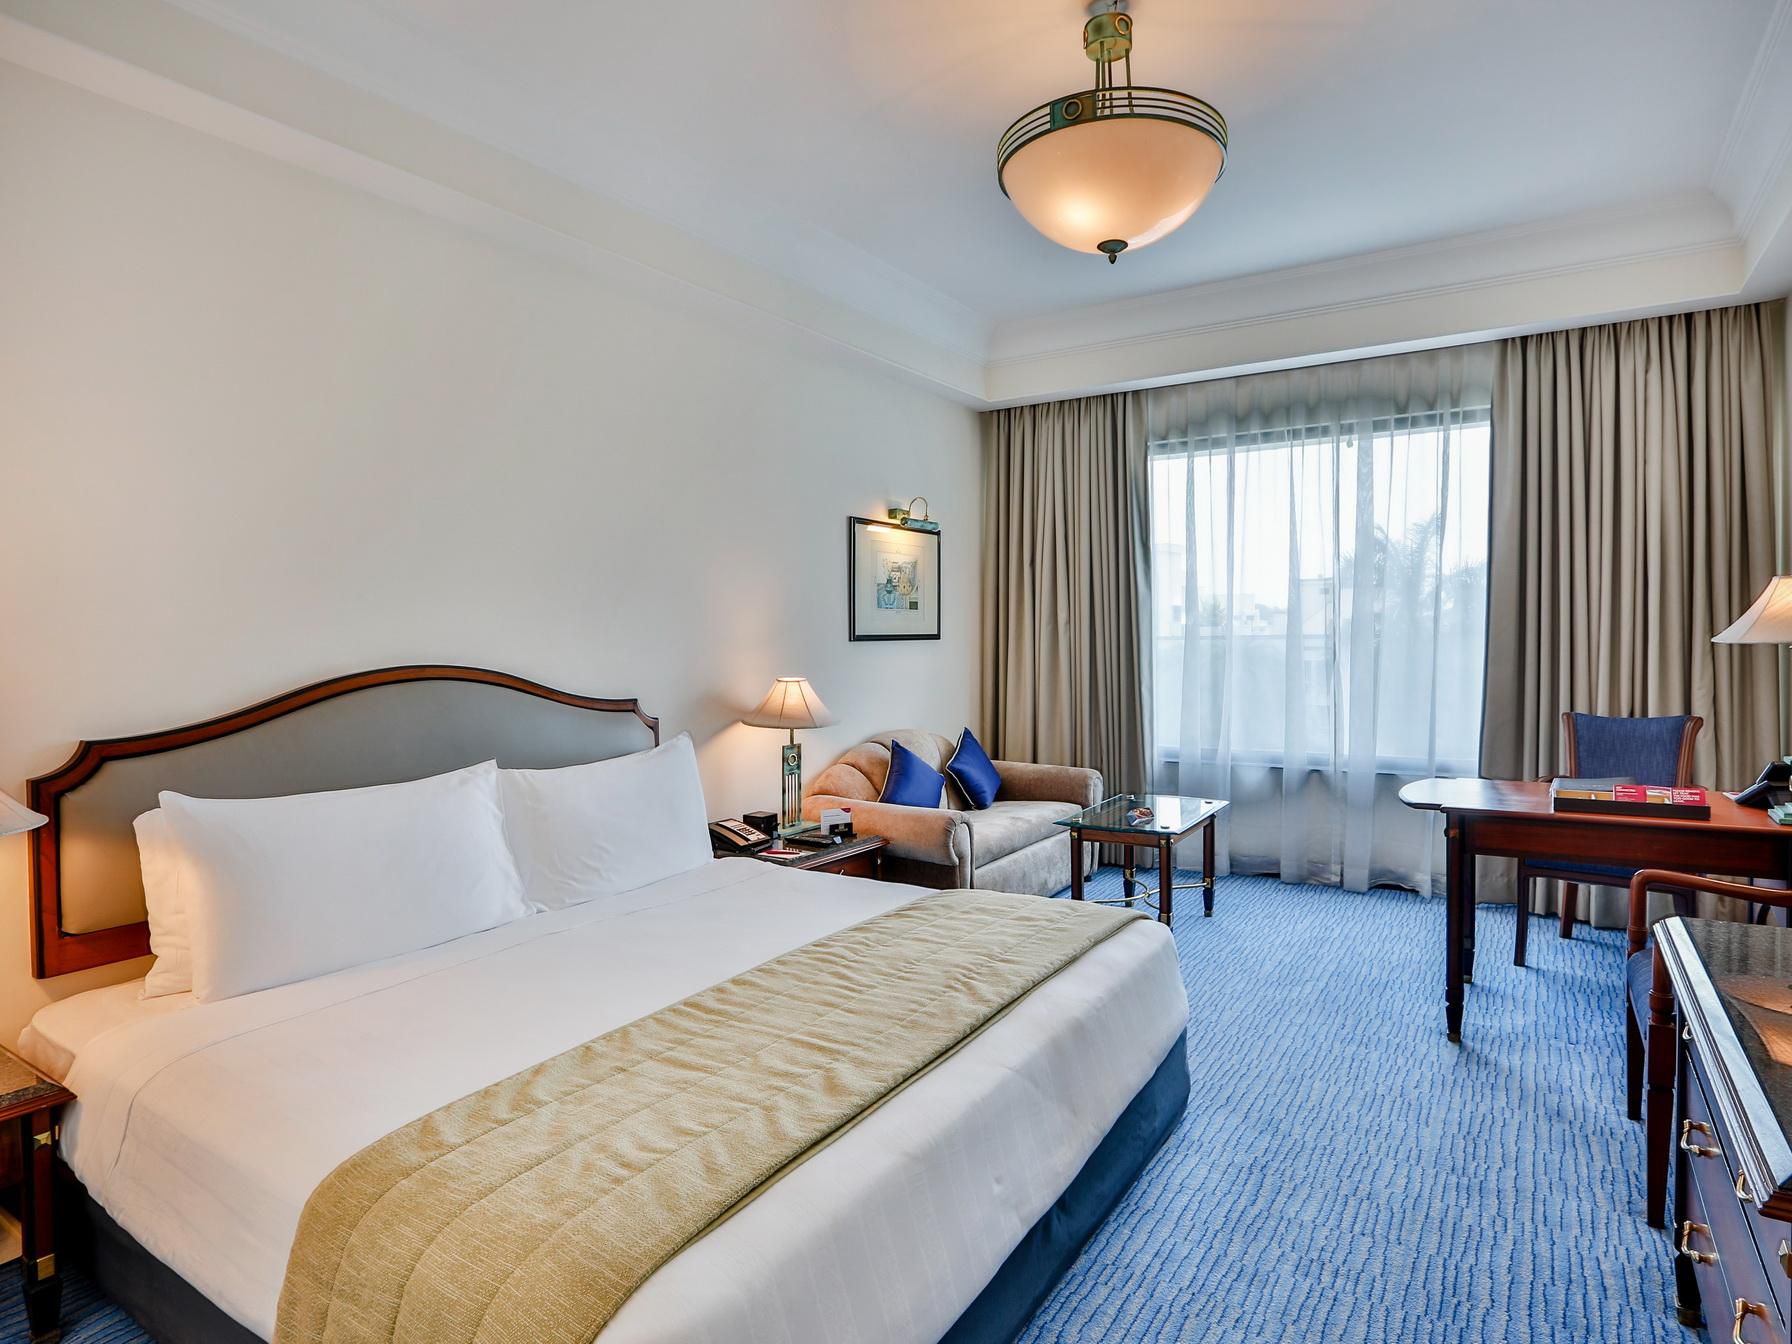 Crowne Plaza Chennai Adyar
Park features 287 spacious and well-appointed rooms and suites for discerning business travellers . Located in the heart of Chennai, our hotel offers a unique on - property experience. To personalise your stay please email ashwin.pm@ihg.com.